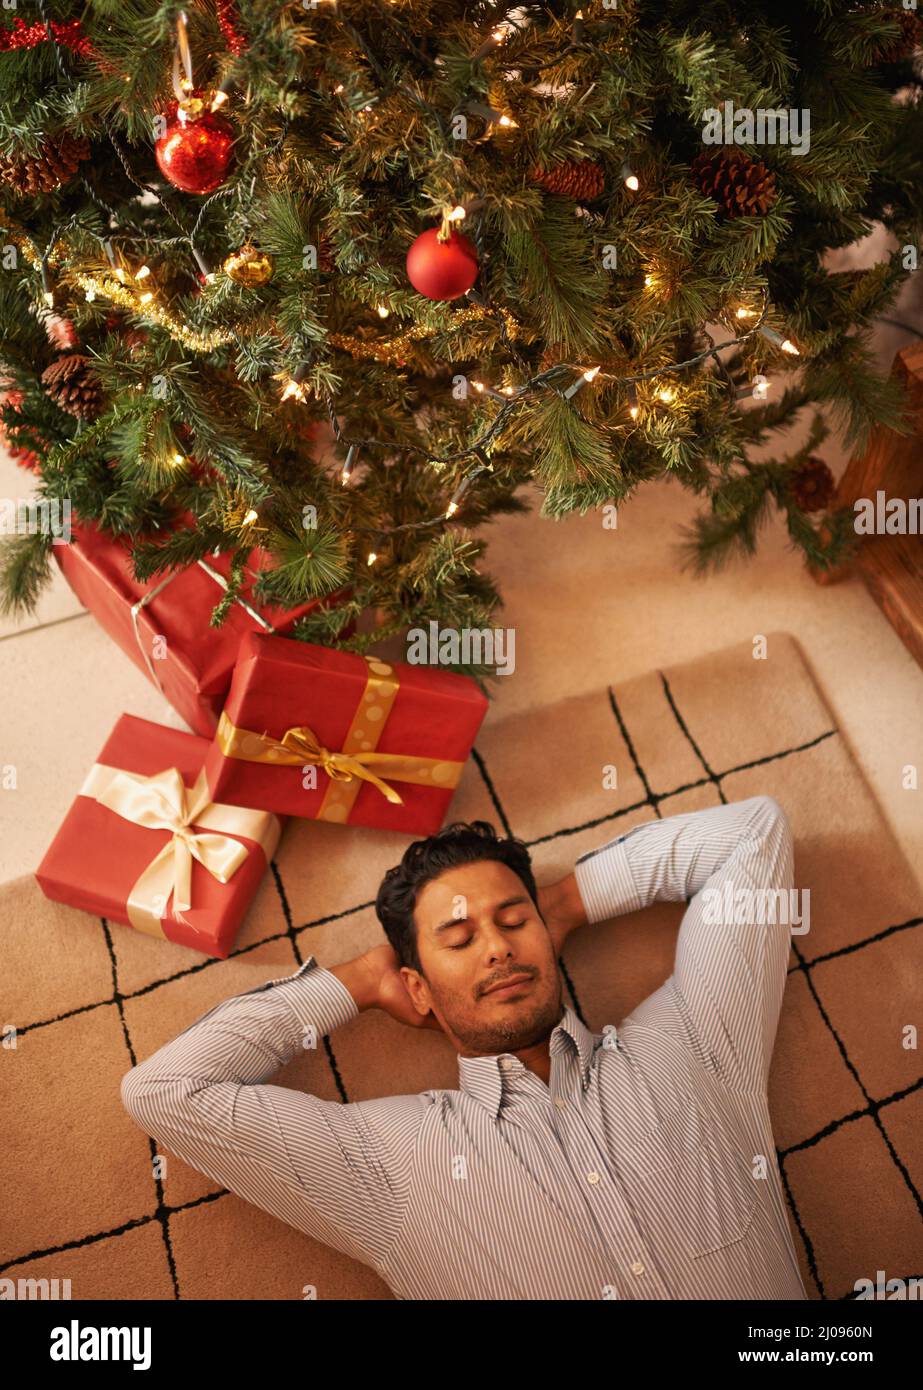 Waiting for Santa. Shot of a young man napping under the christmas tree. Stock Photo